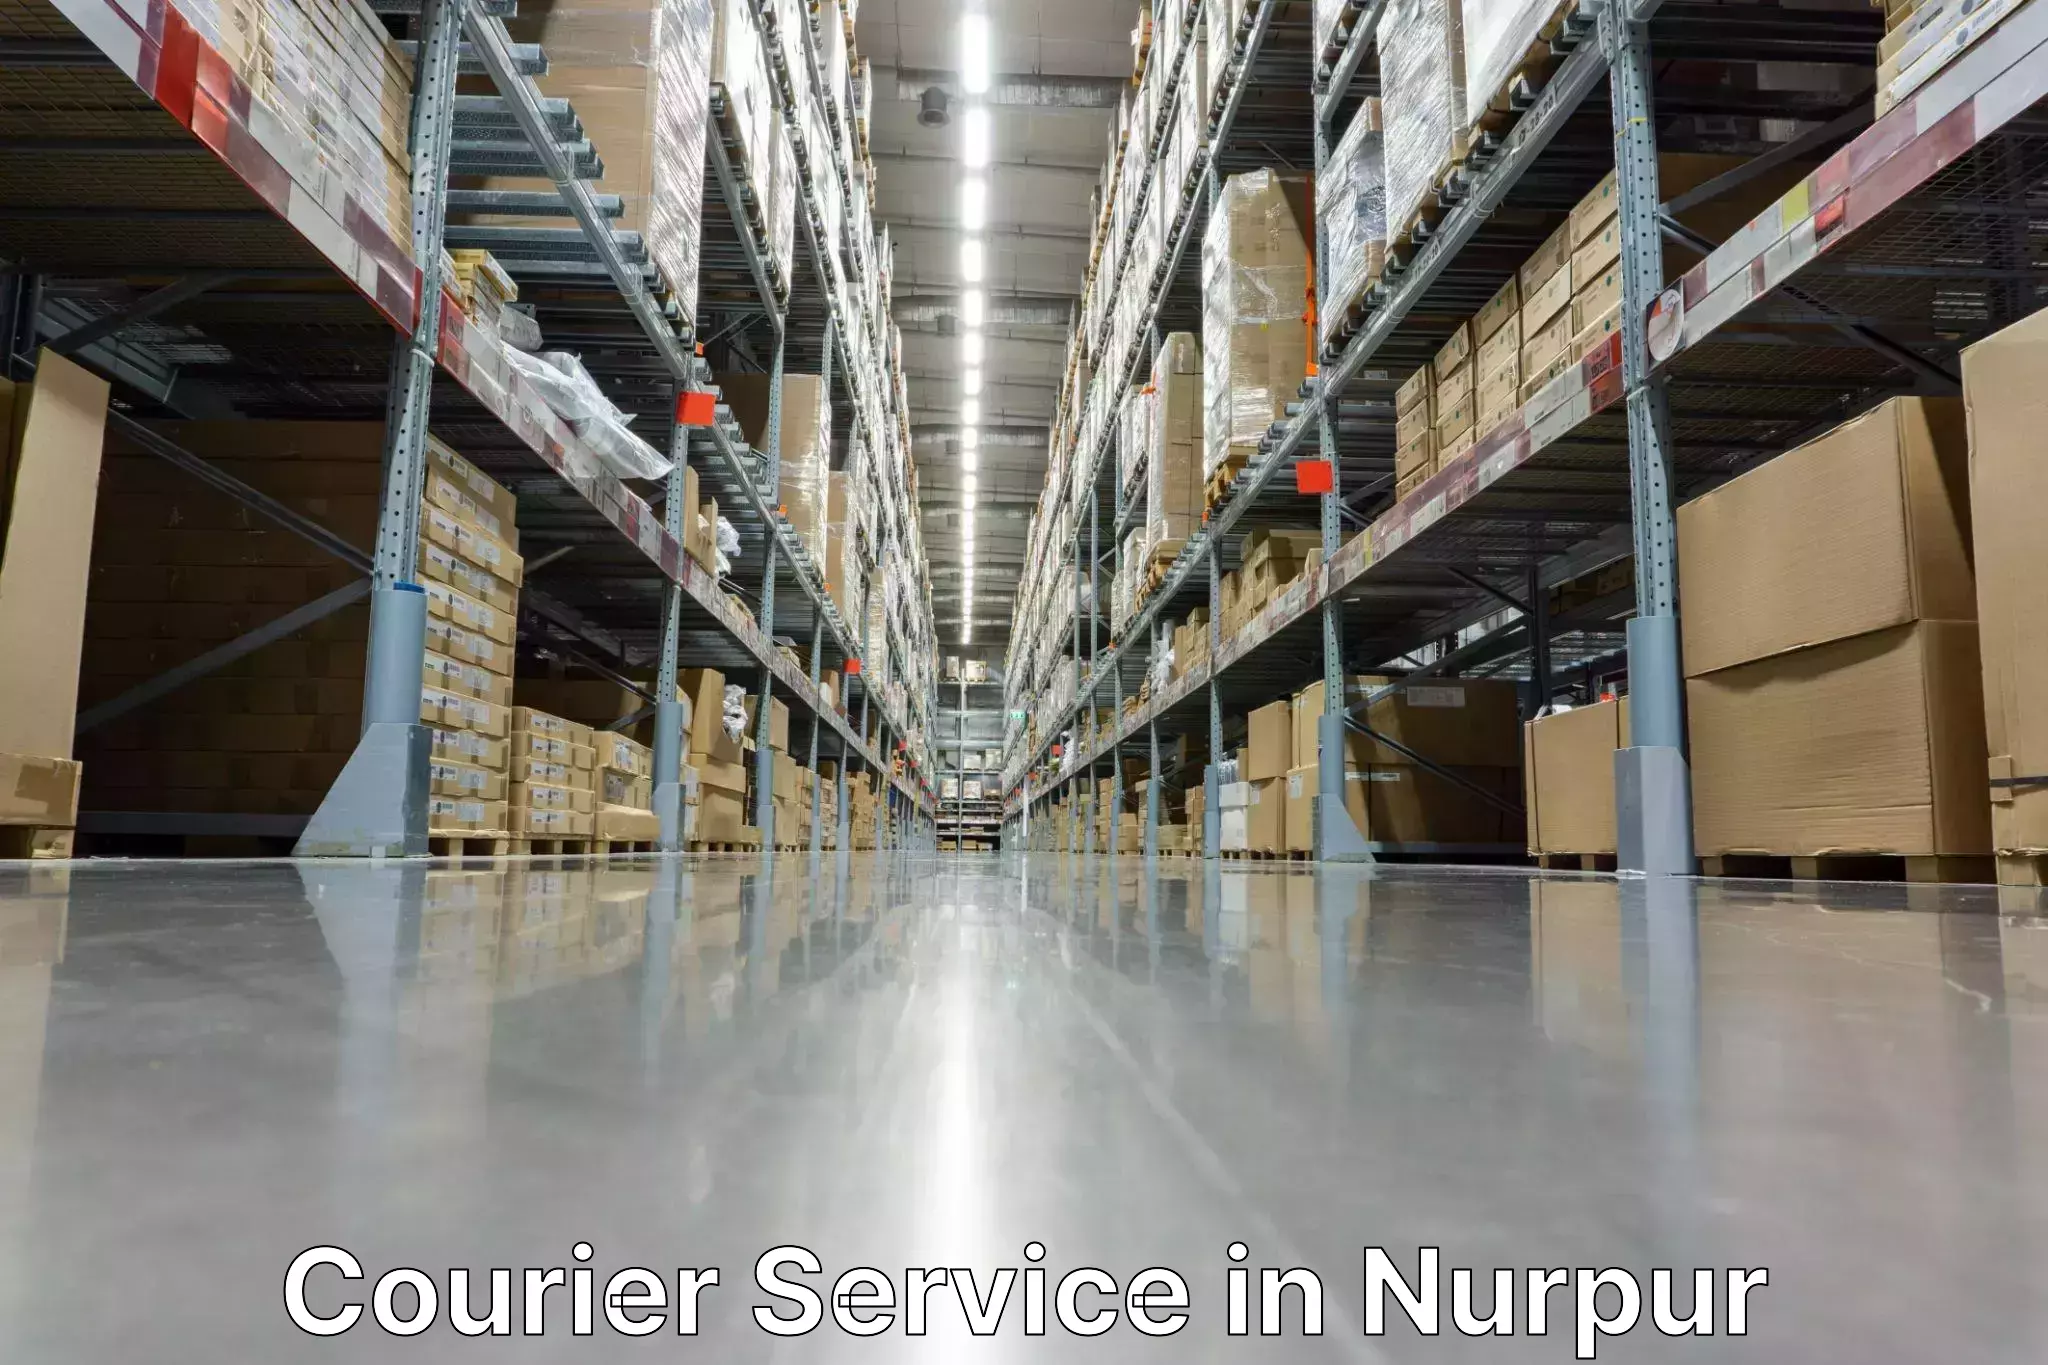 Tailored delivery services in Nurpur